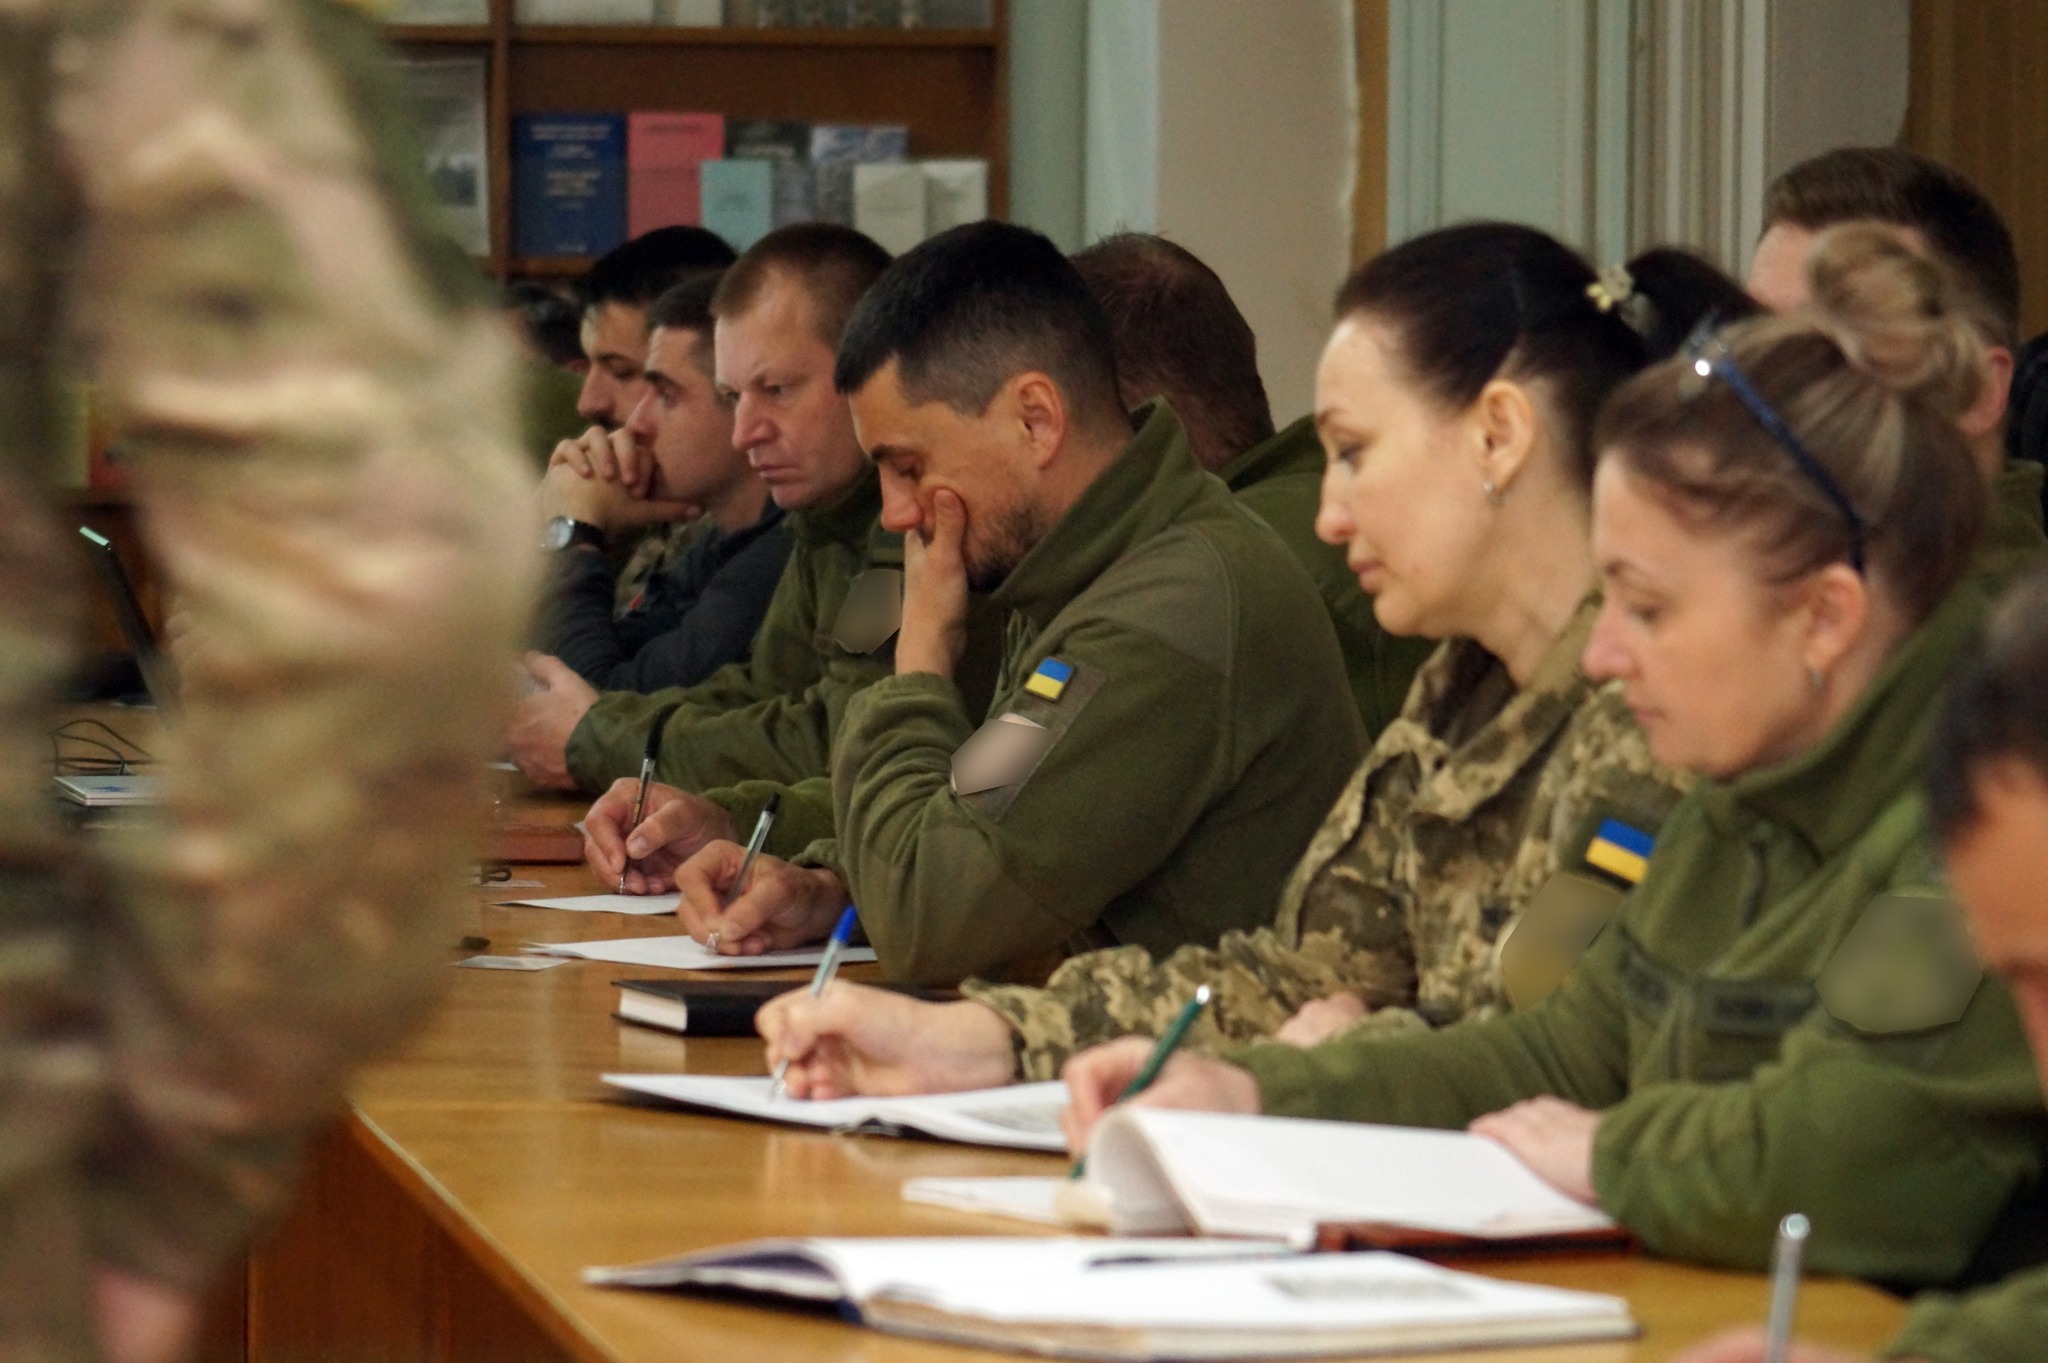 Over a thousand Ukrainian military personnel received specialized training in International Humanitarian Law